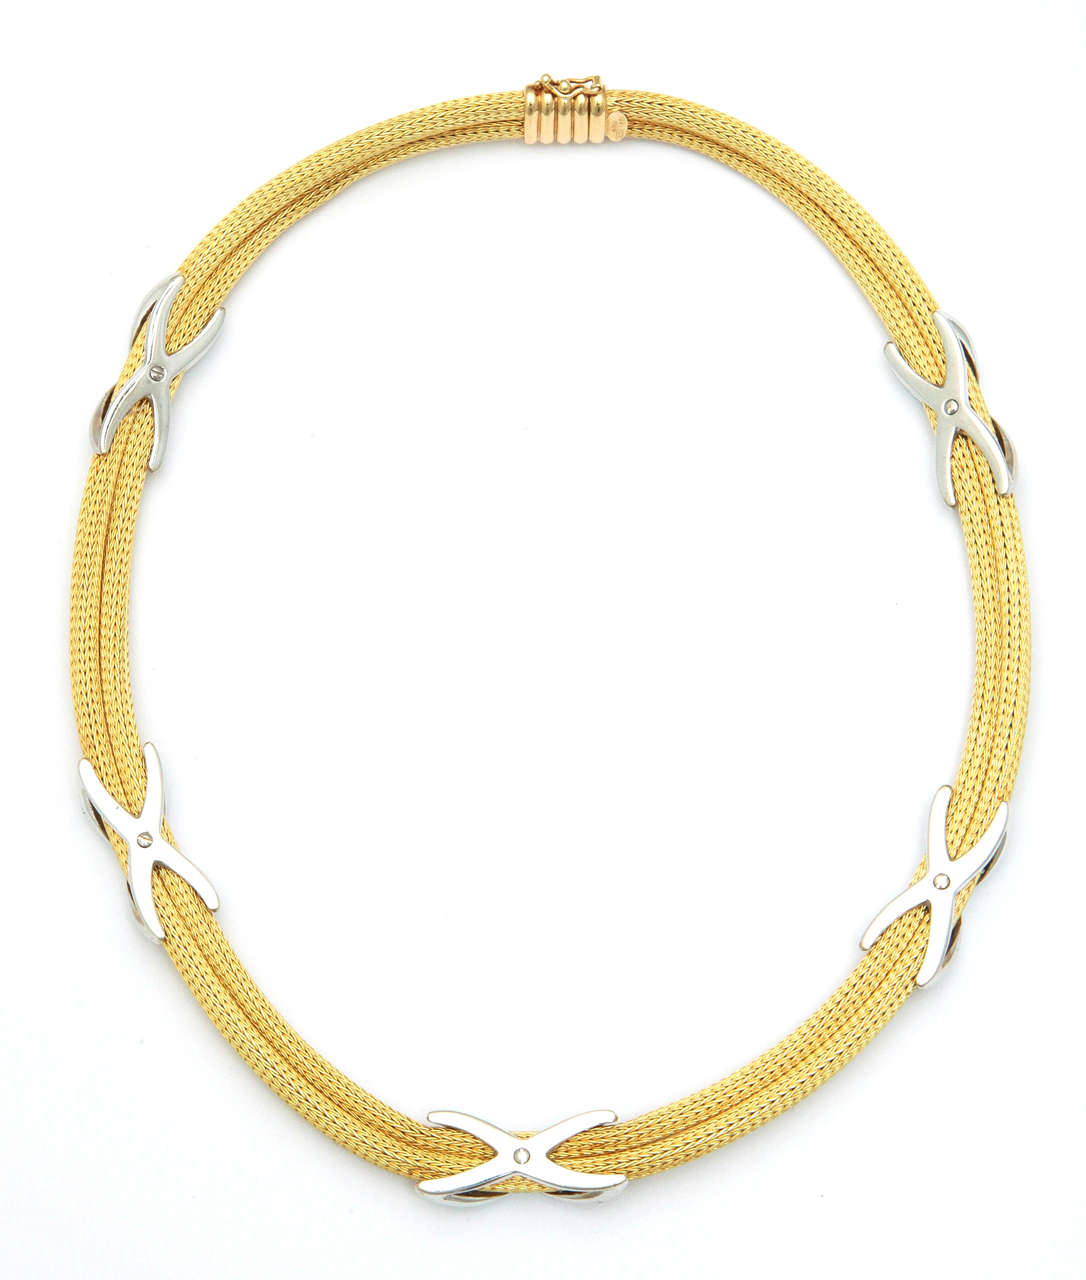 18kt Yellow Gold  double weave Chain  with 3 full cut - pave set  - Diamond - Adornments & 2 unset criss cross elements. Very chic and elegant. Ca 1980.  when you want to be sexy ----but prim & proper.  Signed with Maker's mark but unknown.